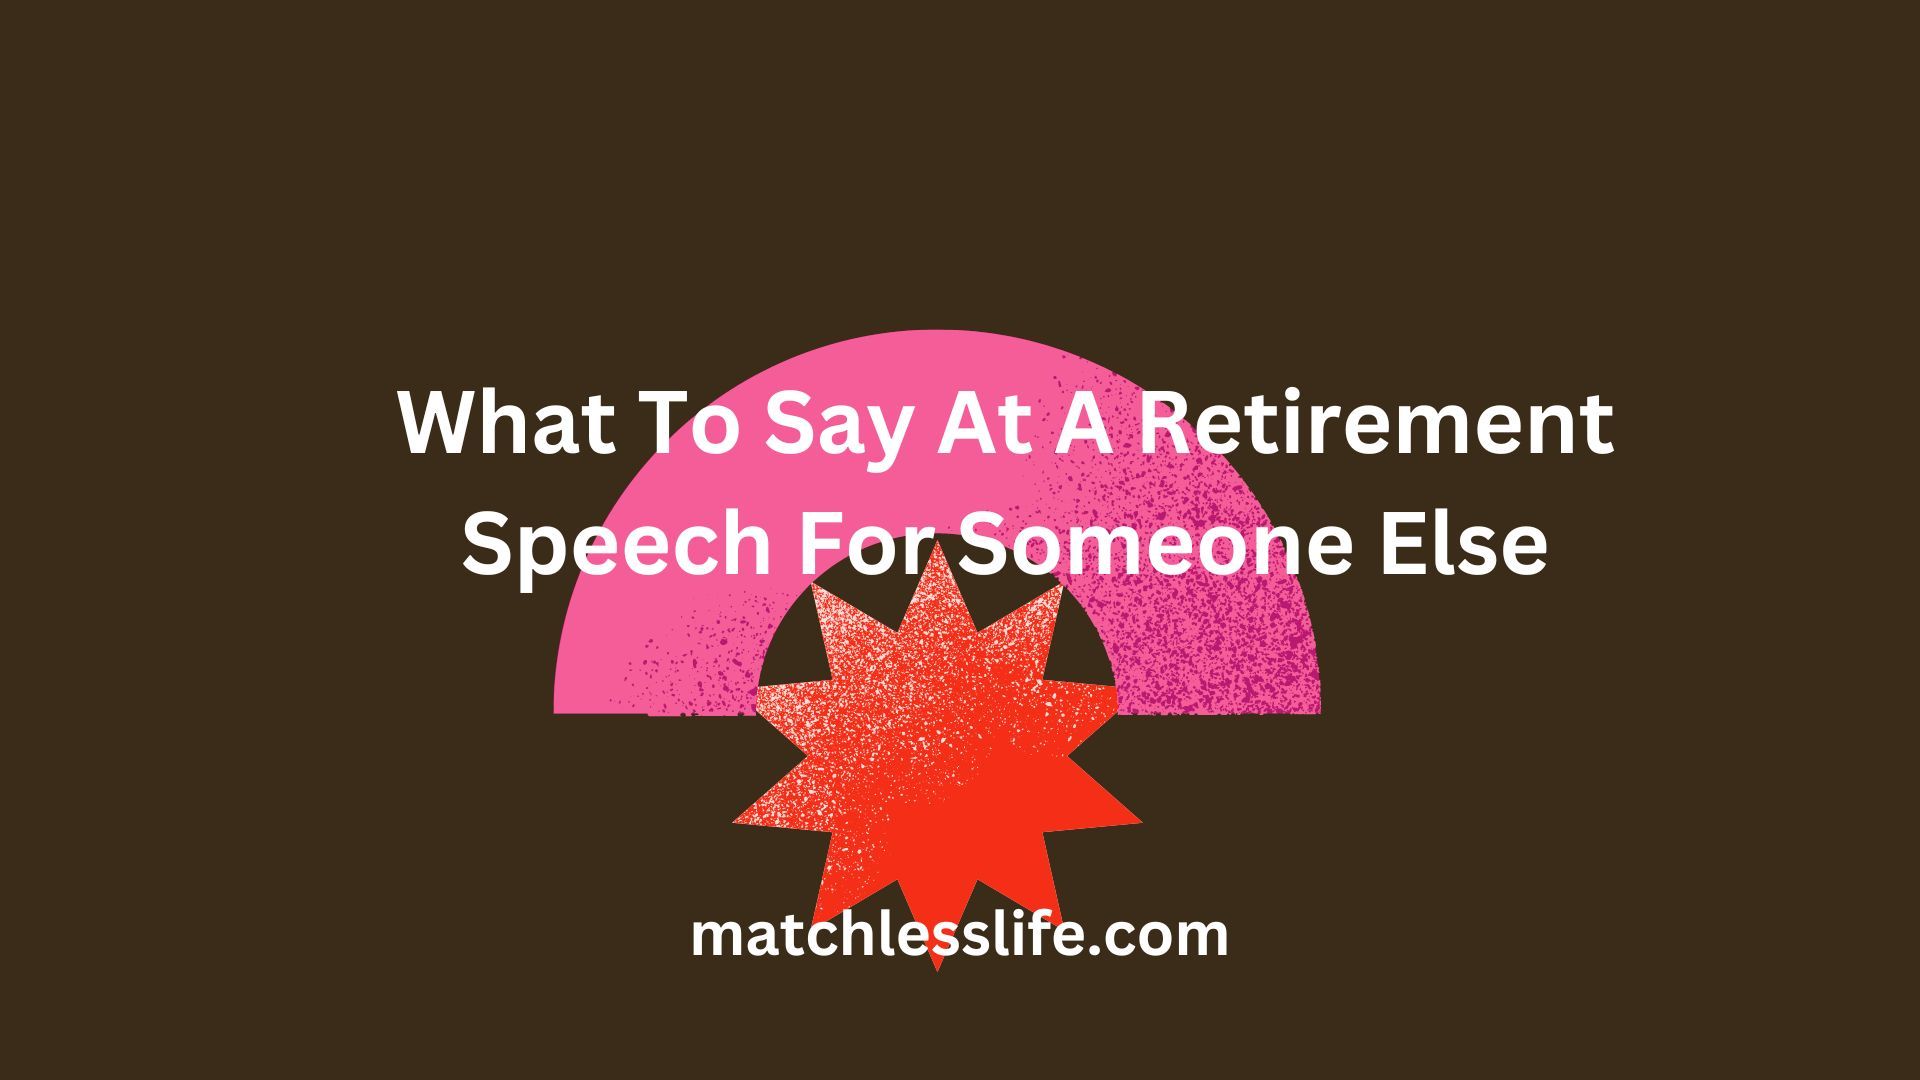 What To Say At A Retirement Speech For Someone Else